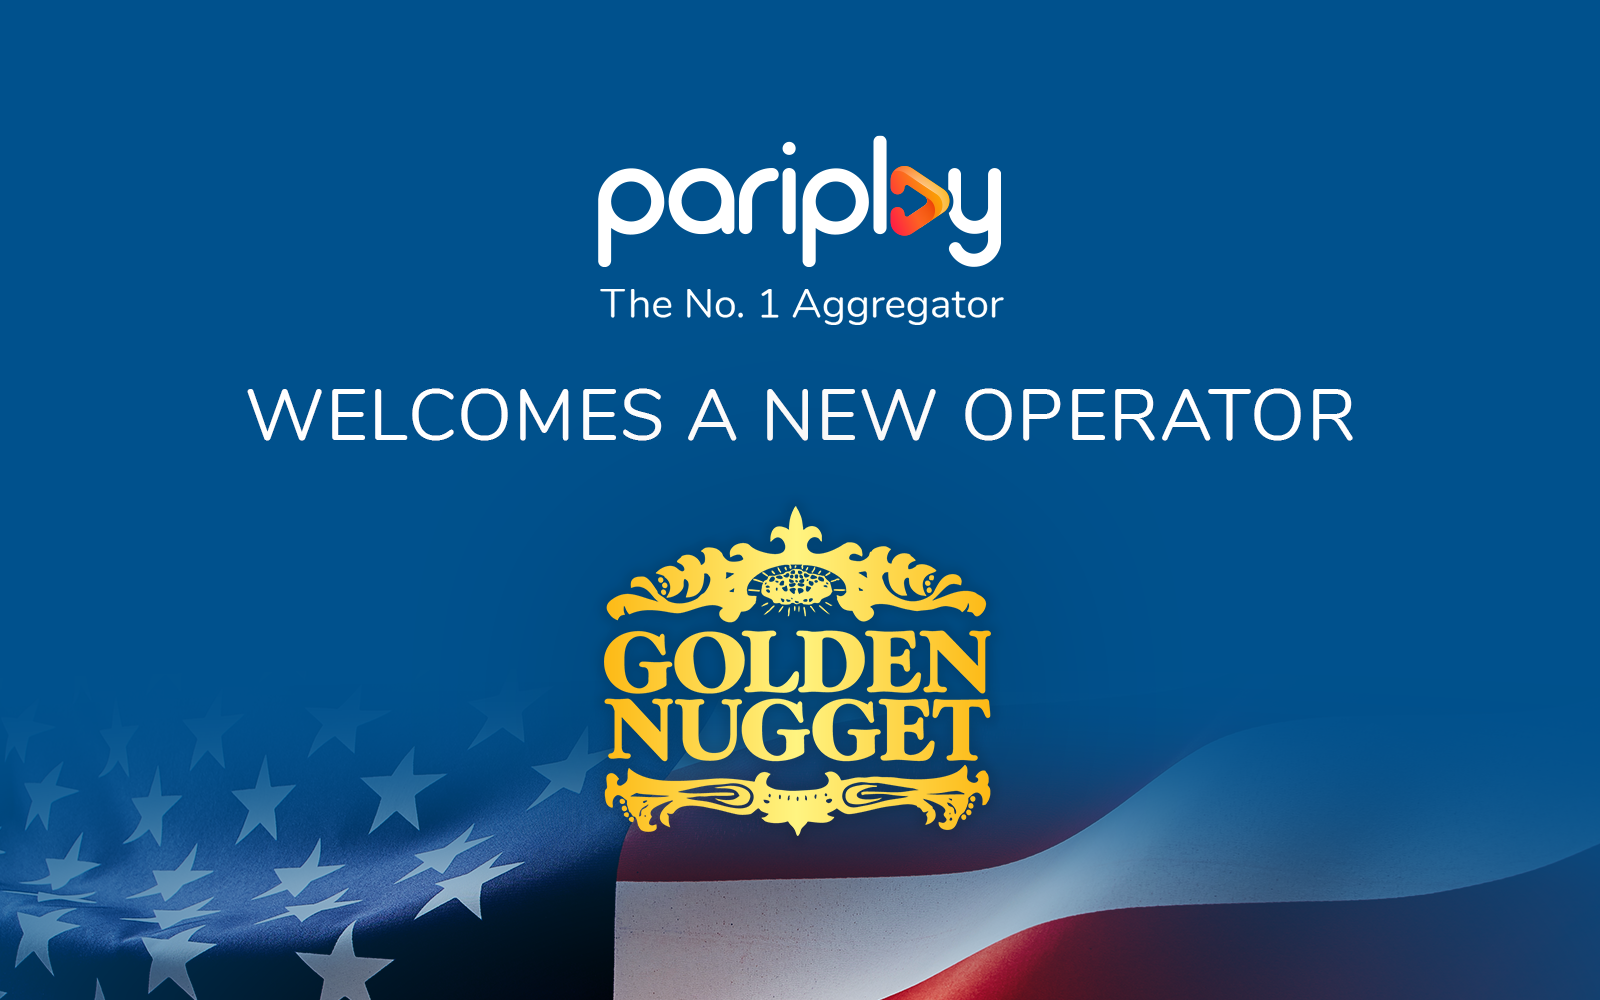 Pariplay signs major deal with Golden Nugget